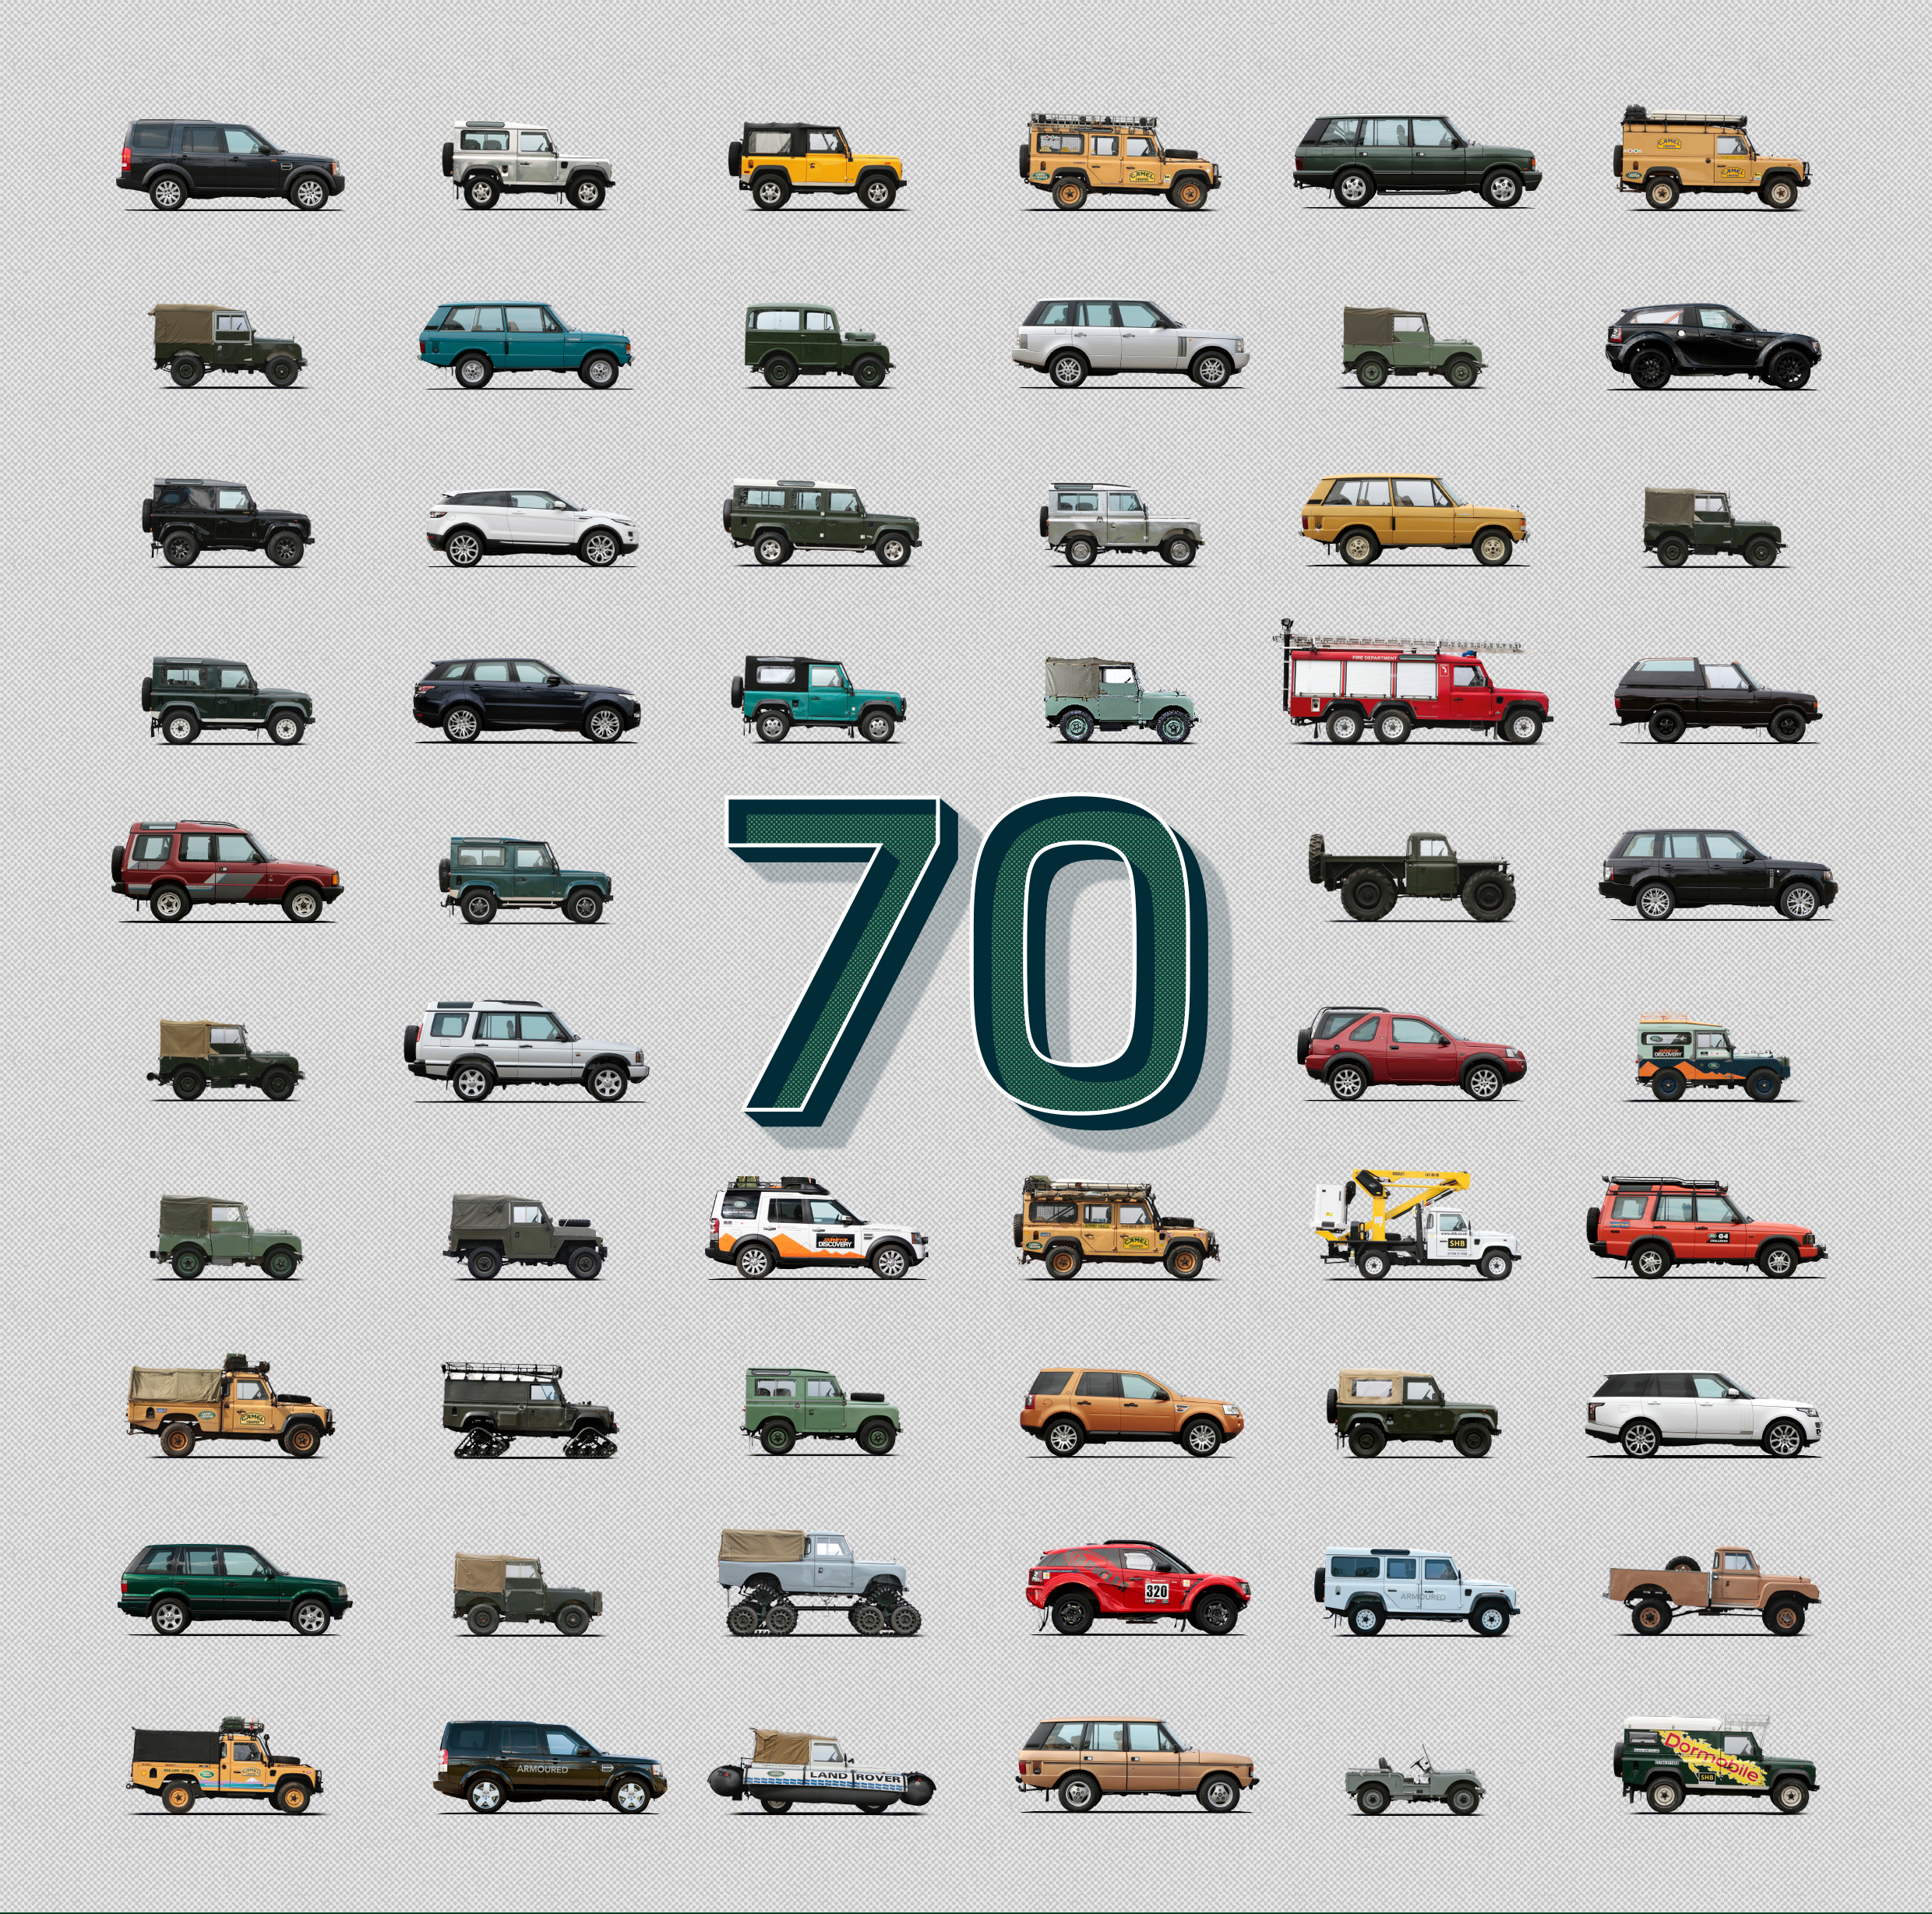 Land Rover birthday, Land Rover celebrates its 70th birthday, ClassicCars.com Journal